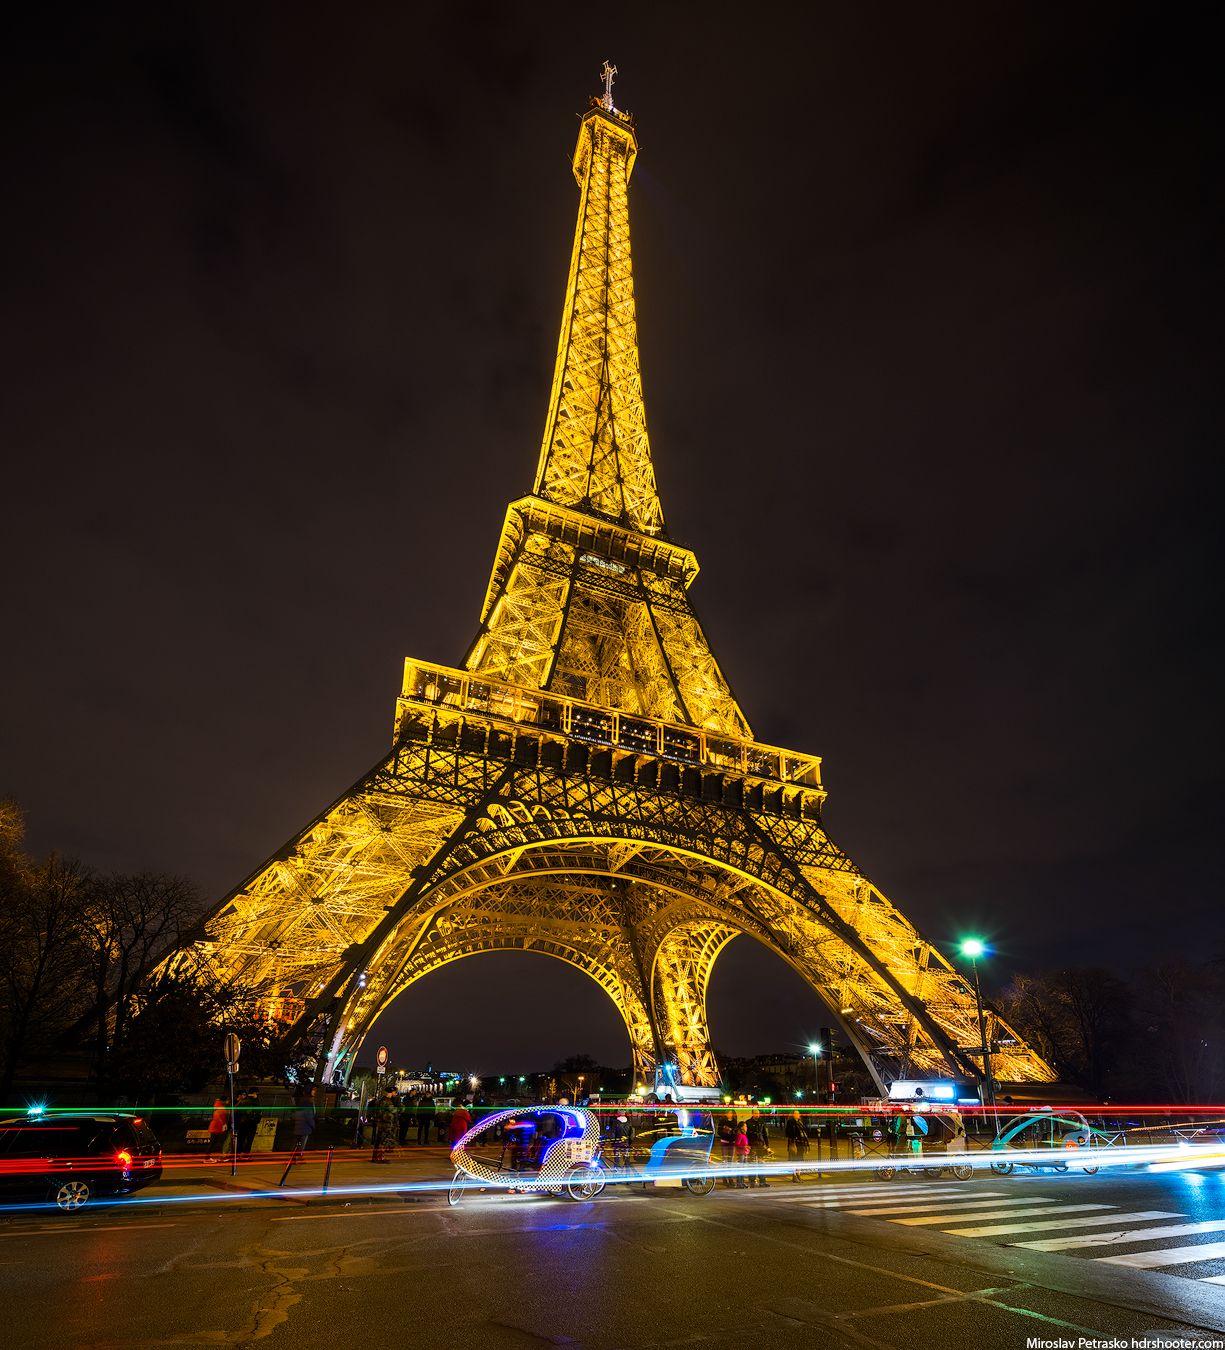 Eiffel tower glowing in the night, Paris - HDRshooter